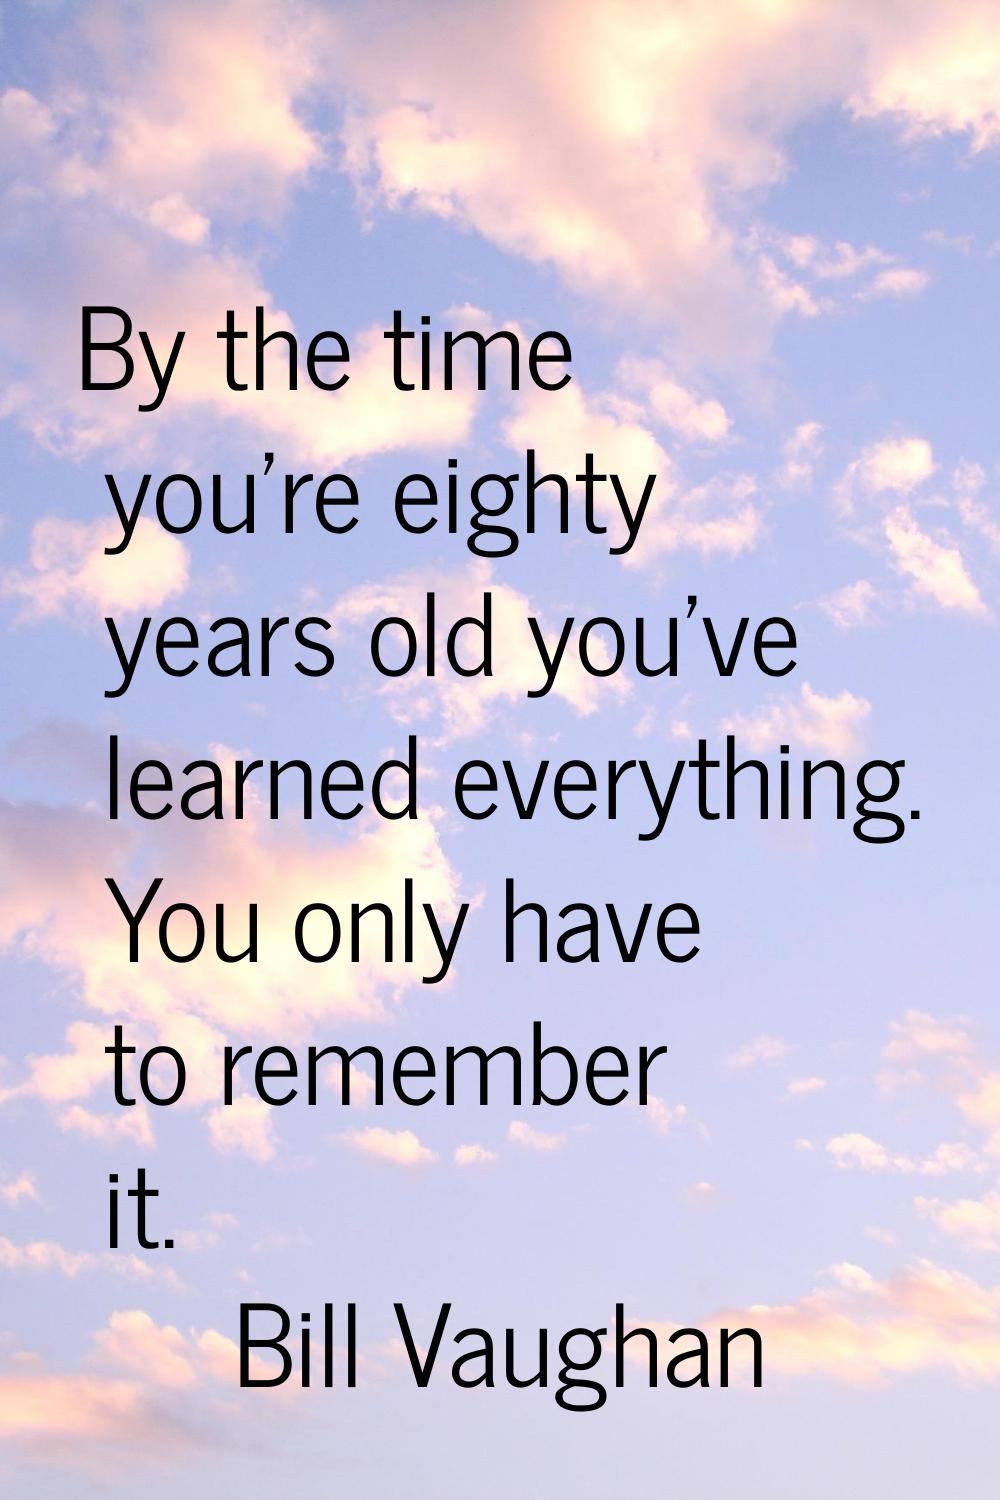 By the time you're eighty years old you've learned everything. You only have to remember it.